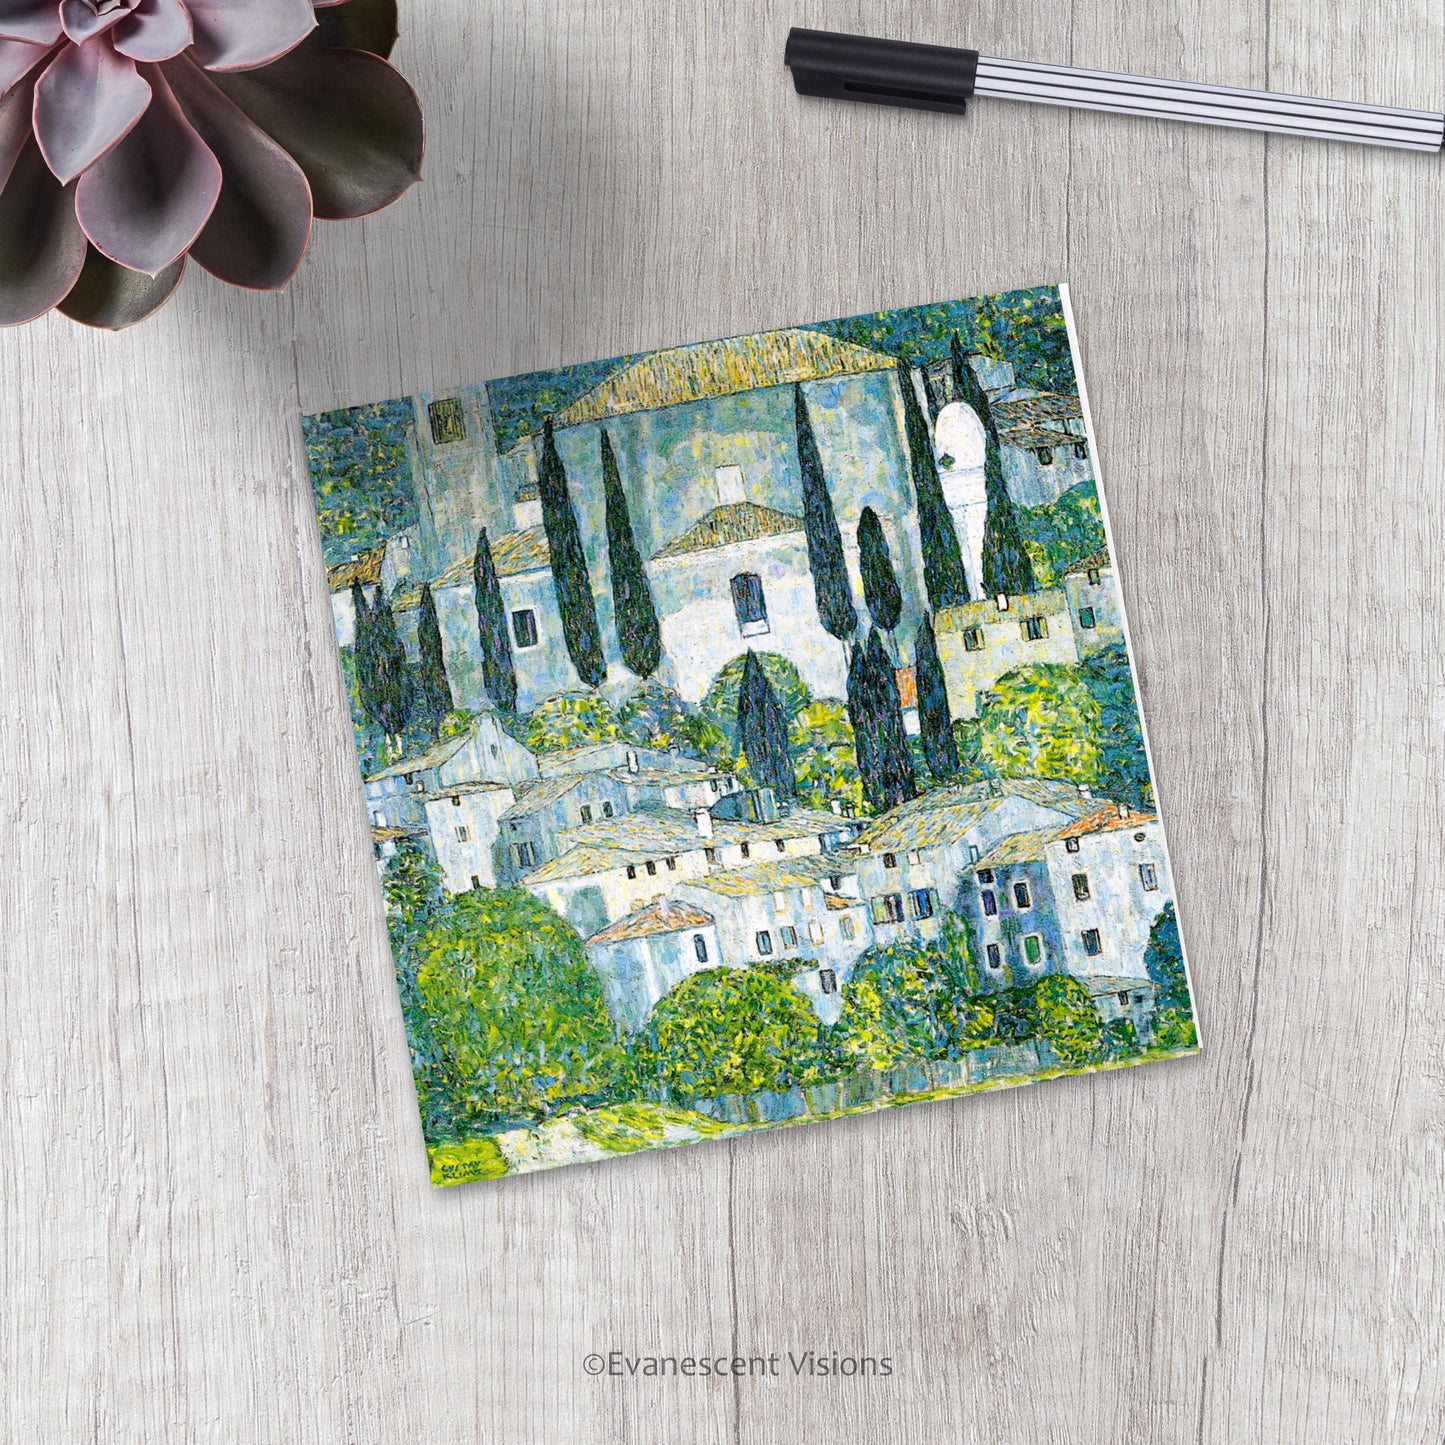 Gustav Klimt Kirche in Cassone Art Greeting Card on a desk with pen and plant